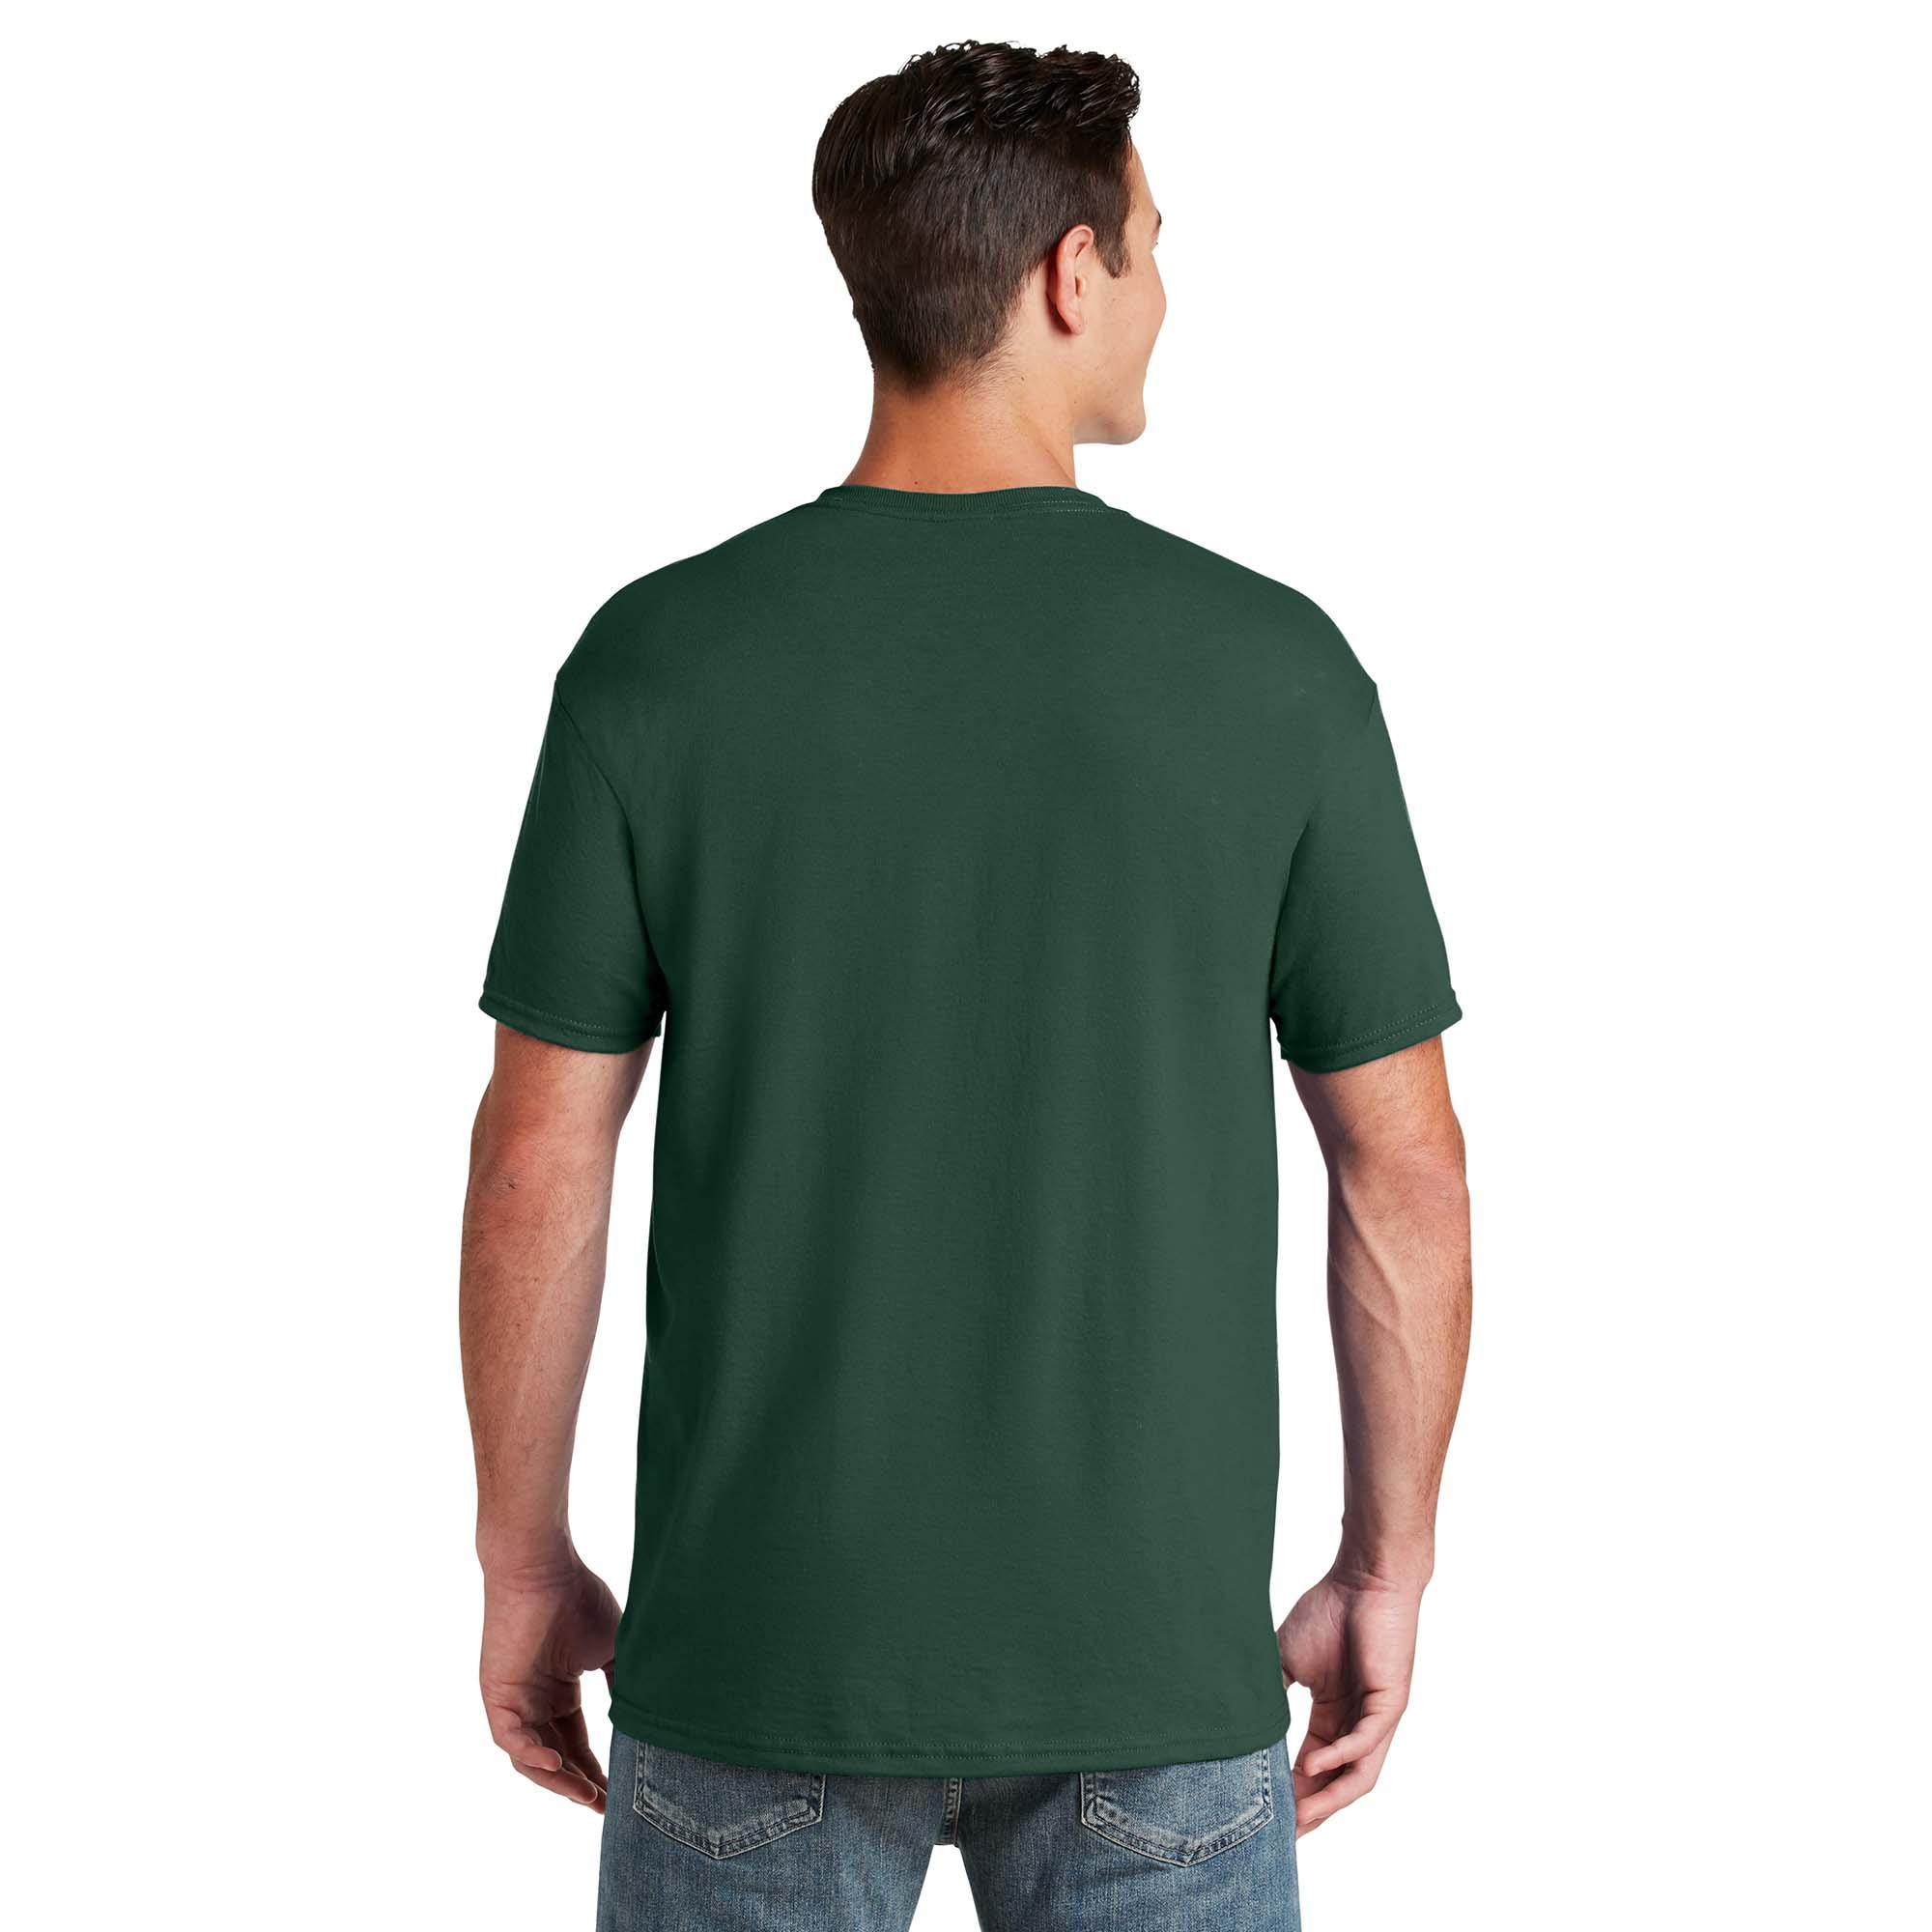 Jerzees 29M Dri-Power 50/50 Cotton/Poly T-Shirt - Forest Green | Full Source